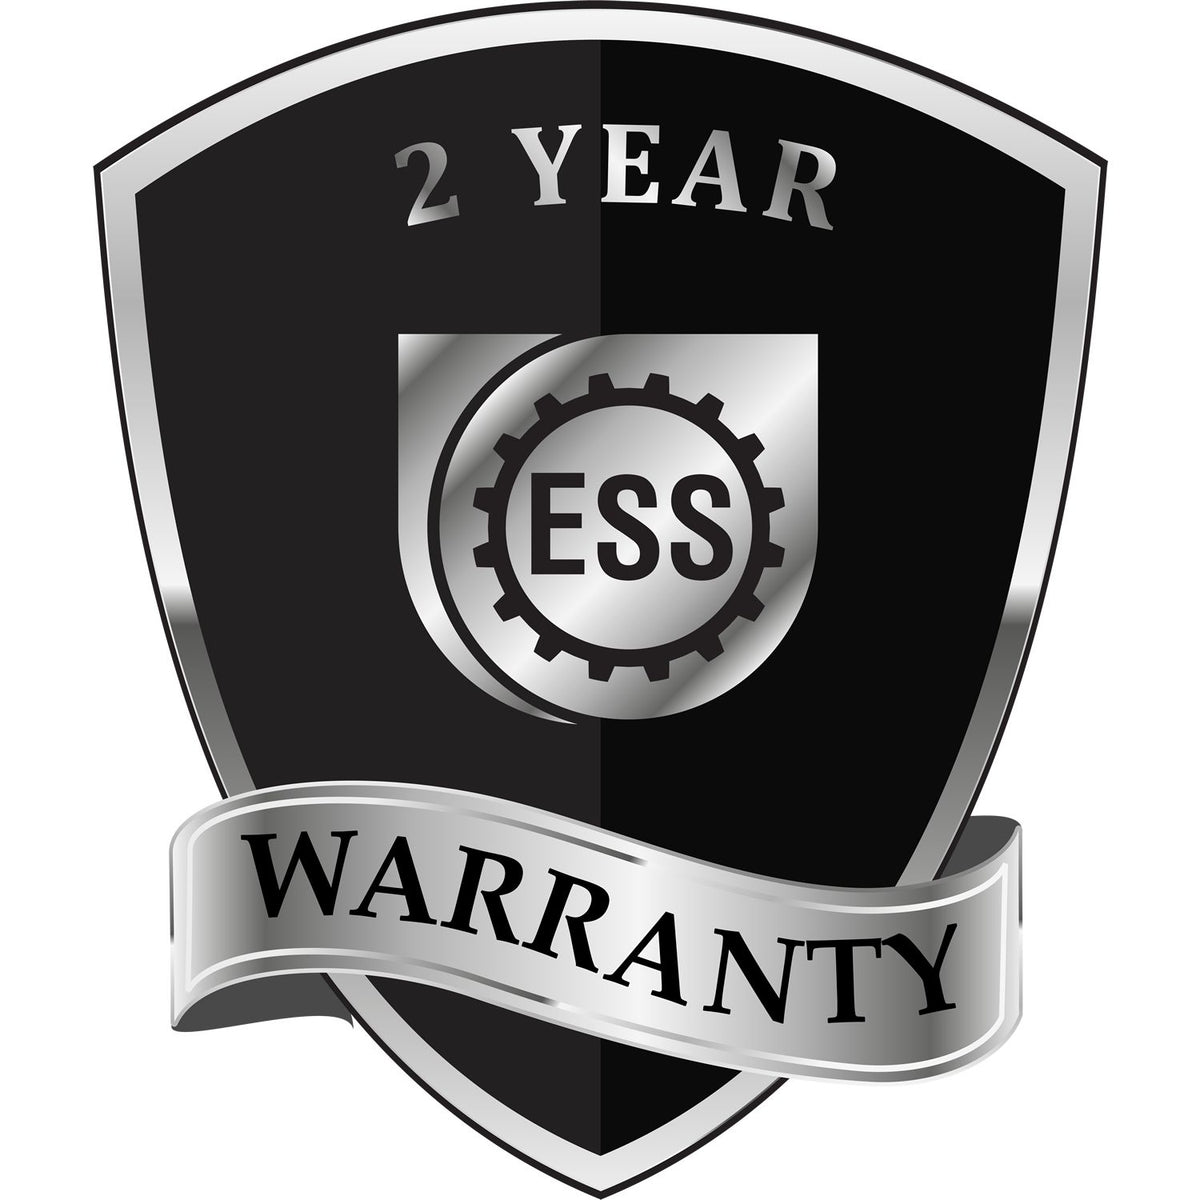 A badge or emblem showing a warranty icon for the Handheld Kentucky Land Surveyor Seal